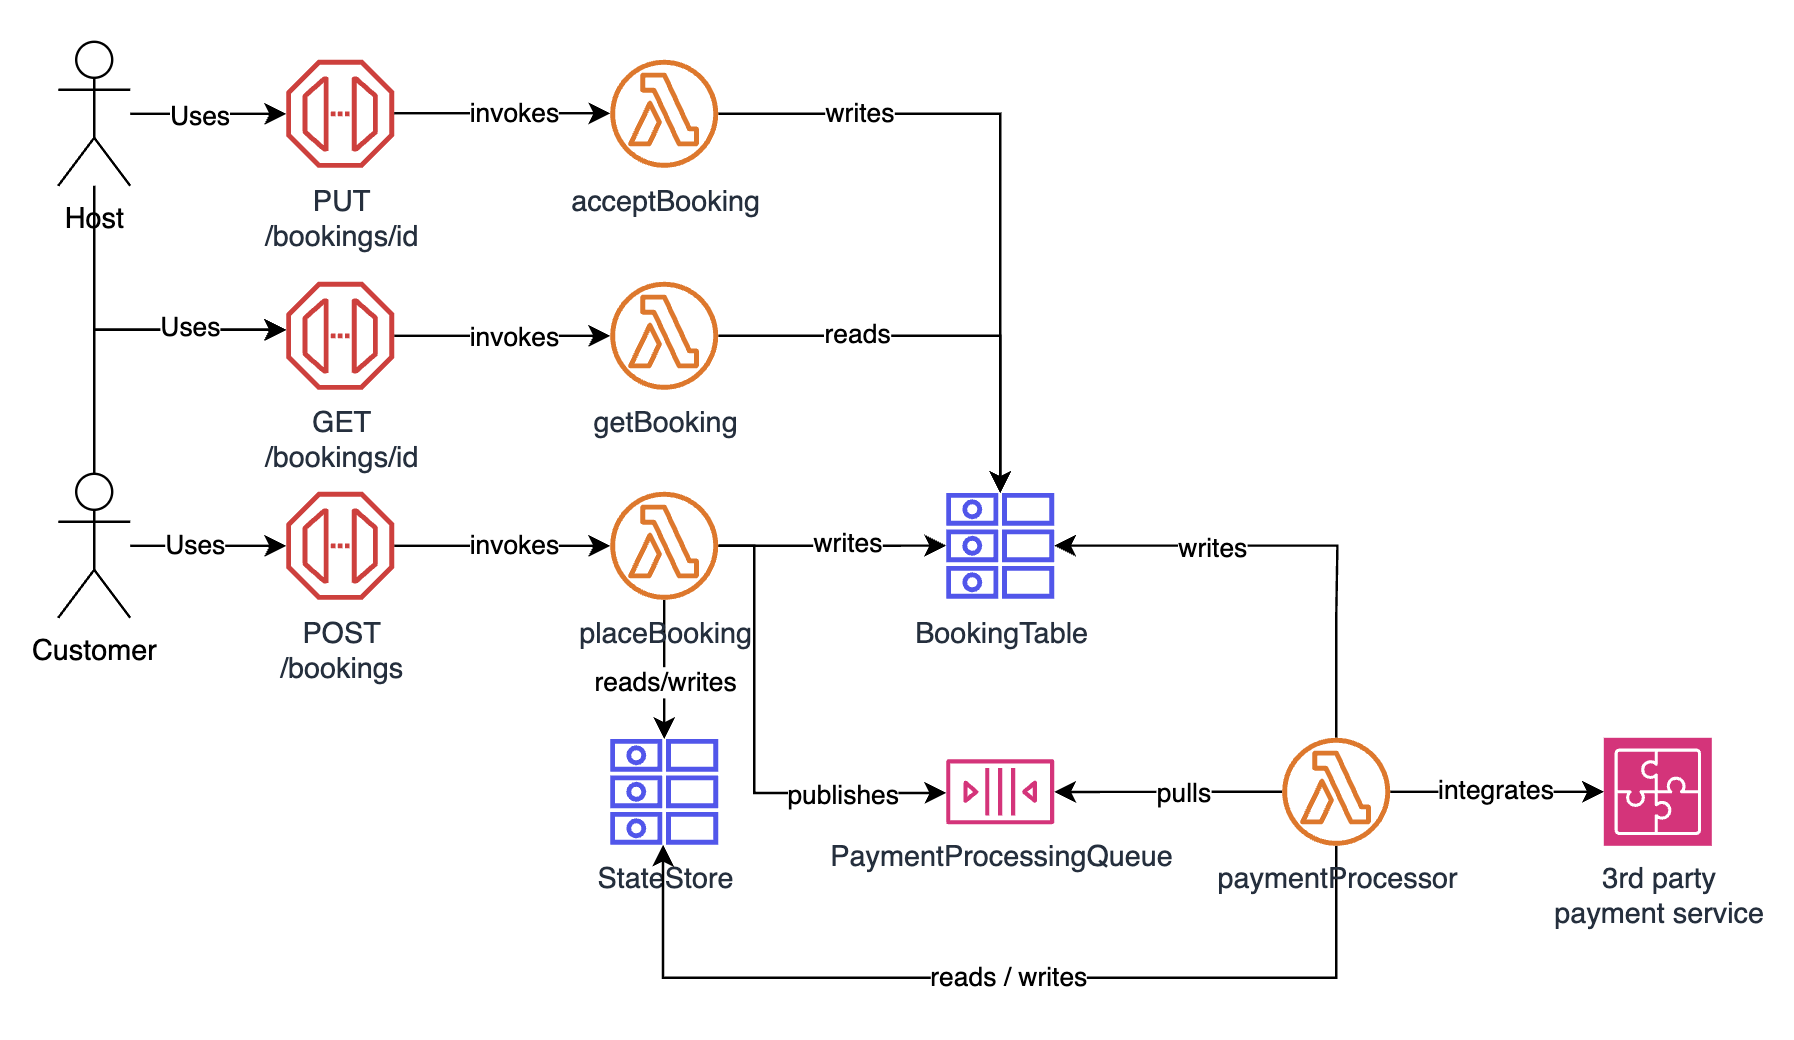 Sequence diagram for events